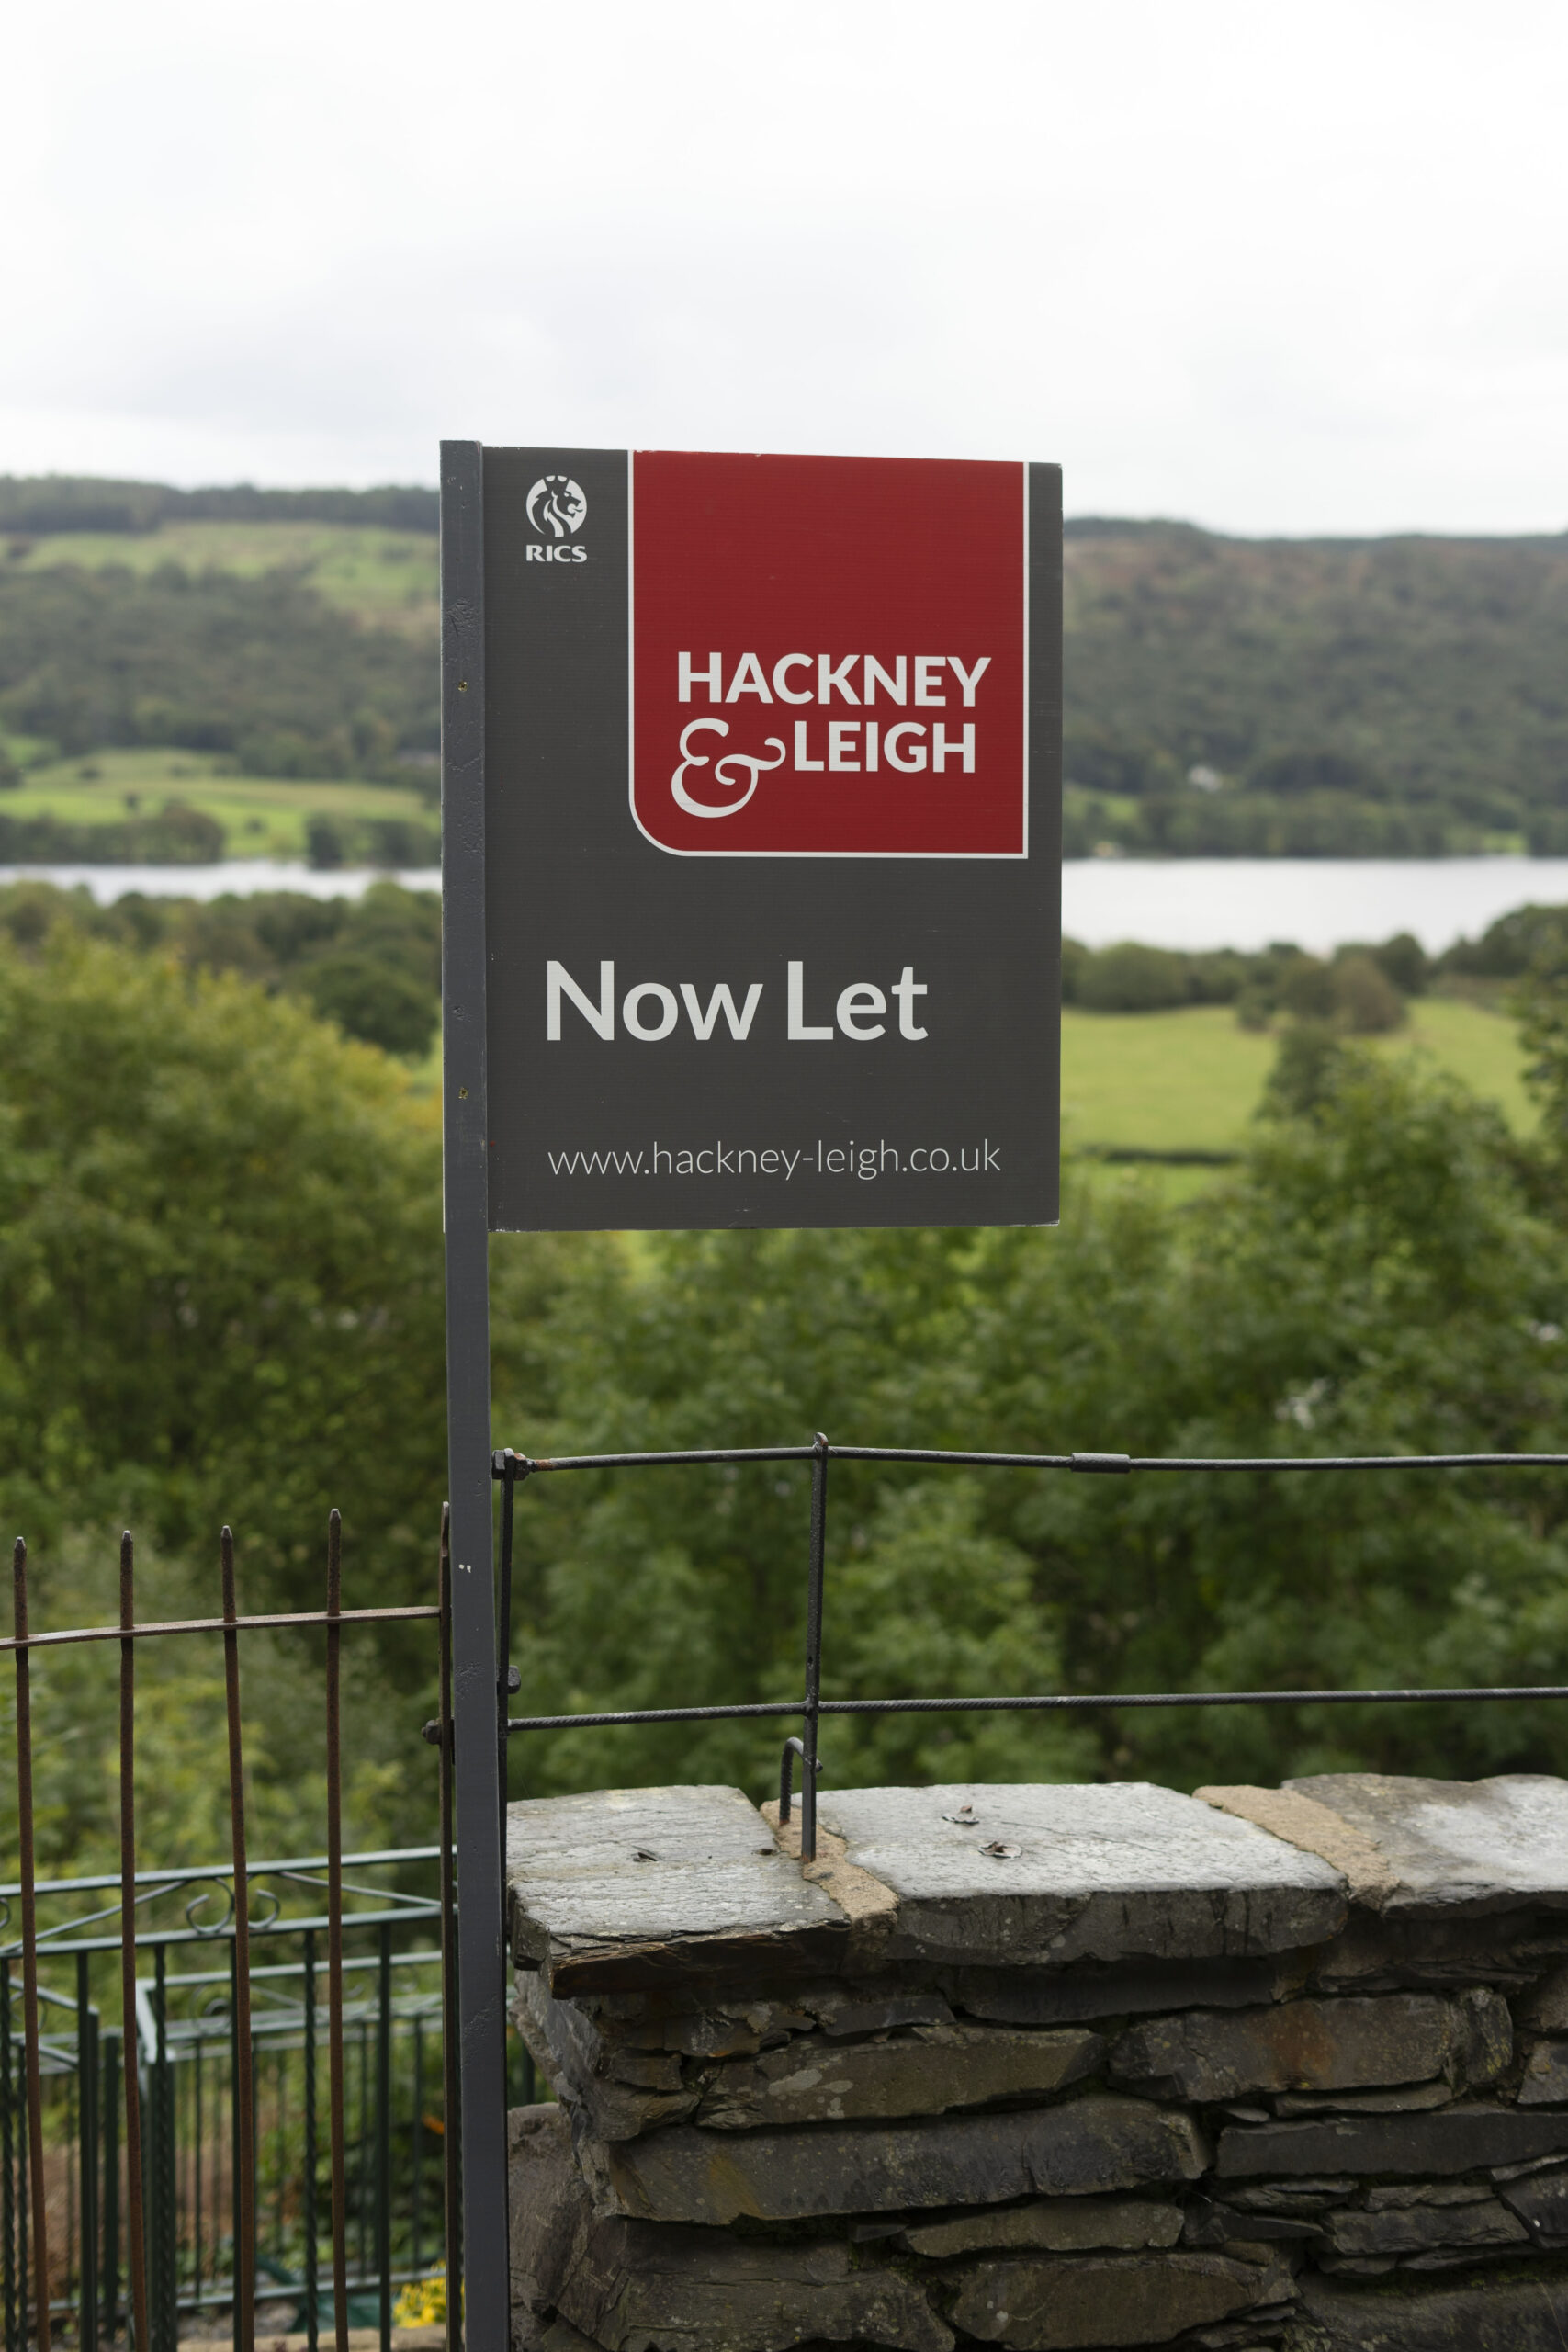 Hackney & Leigh now let sign outside of a house